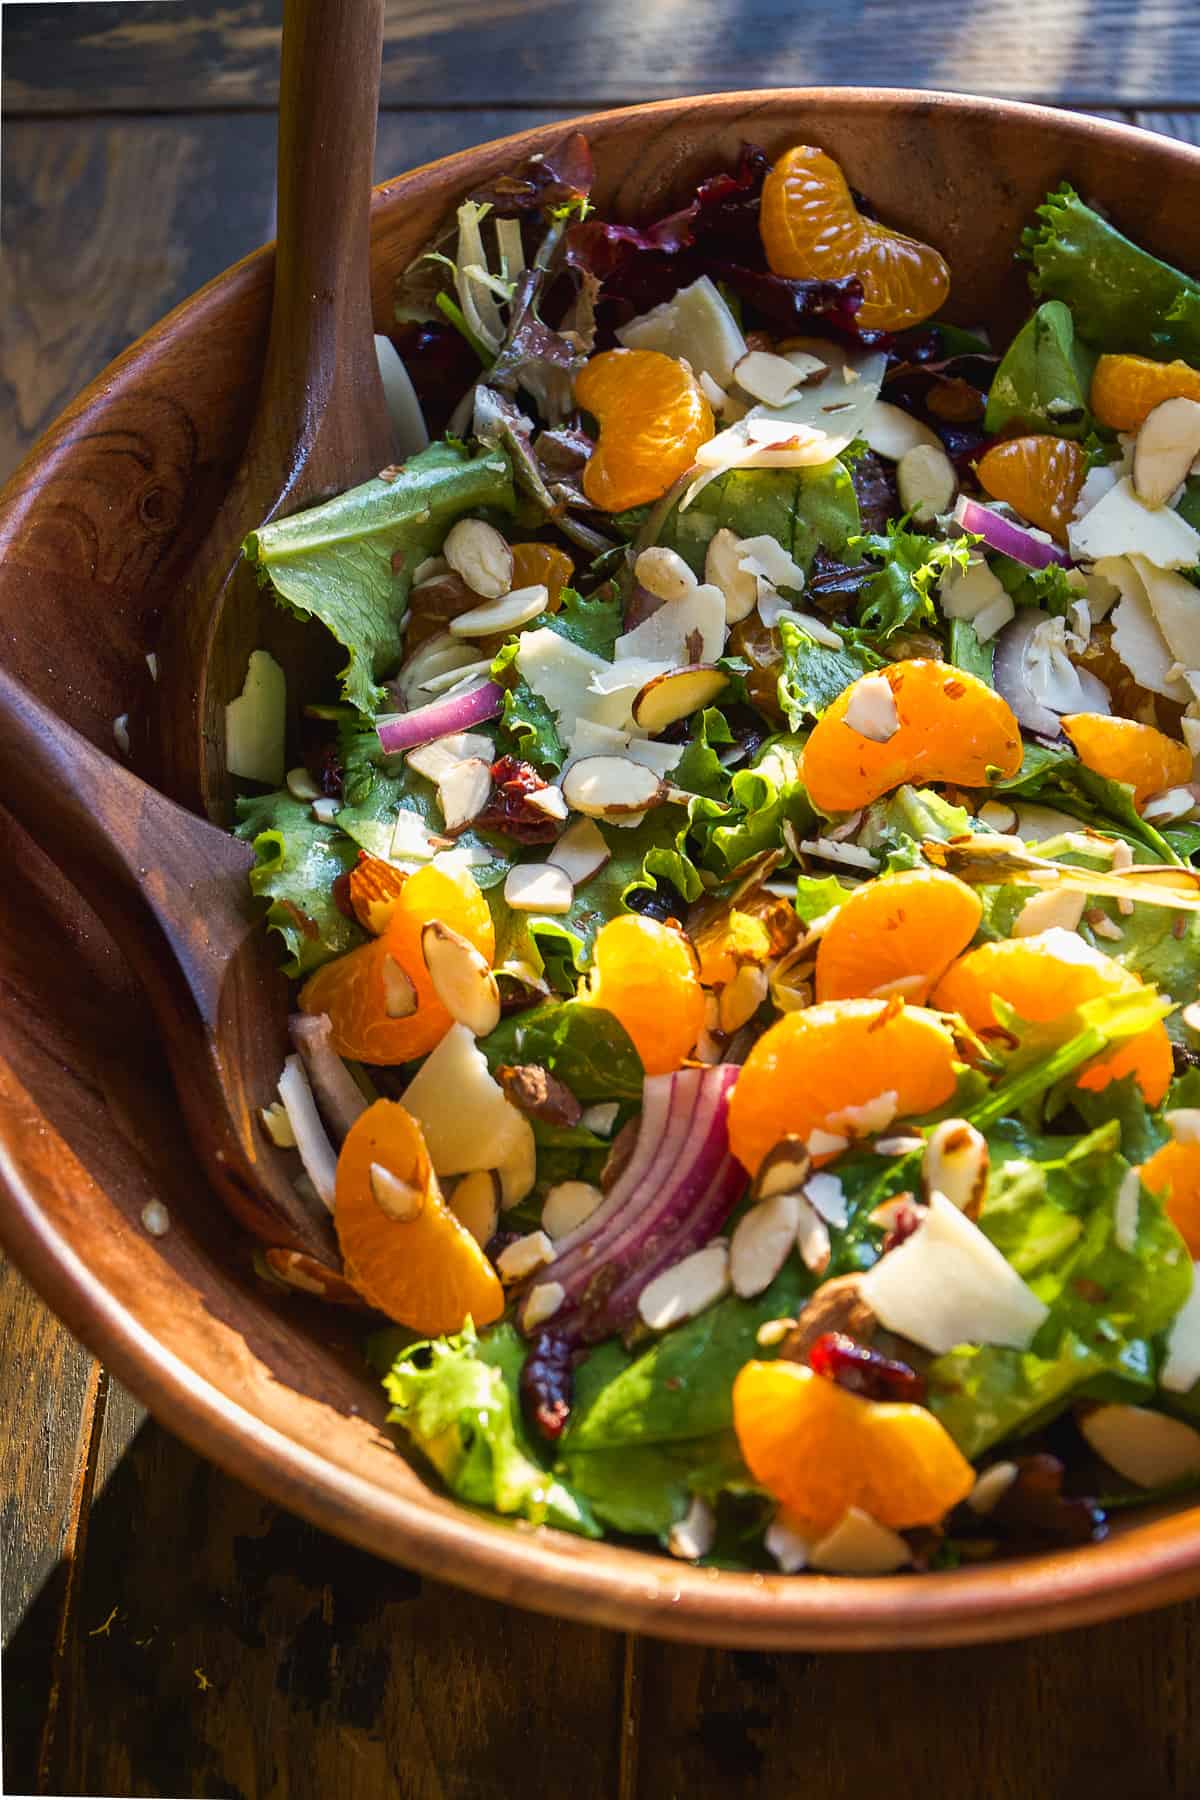 Salad with mandarin oranges tossed in a wooden bowl.